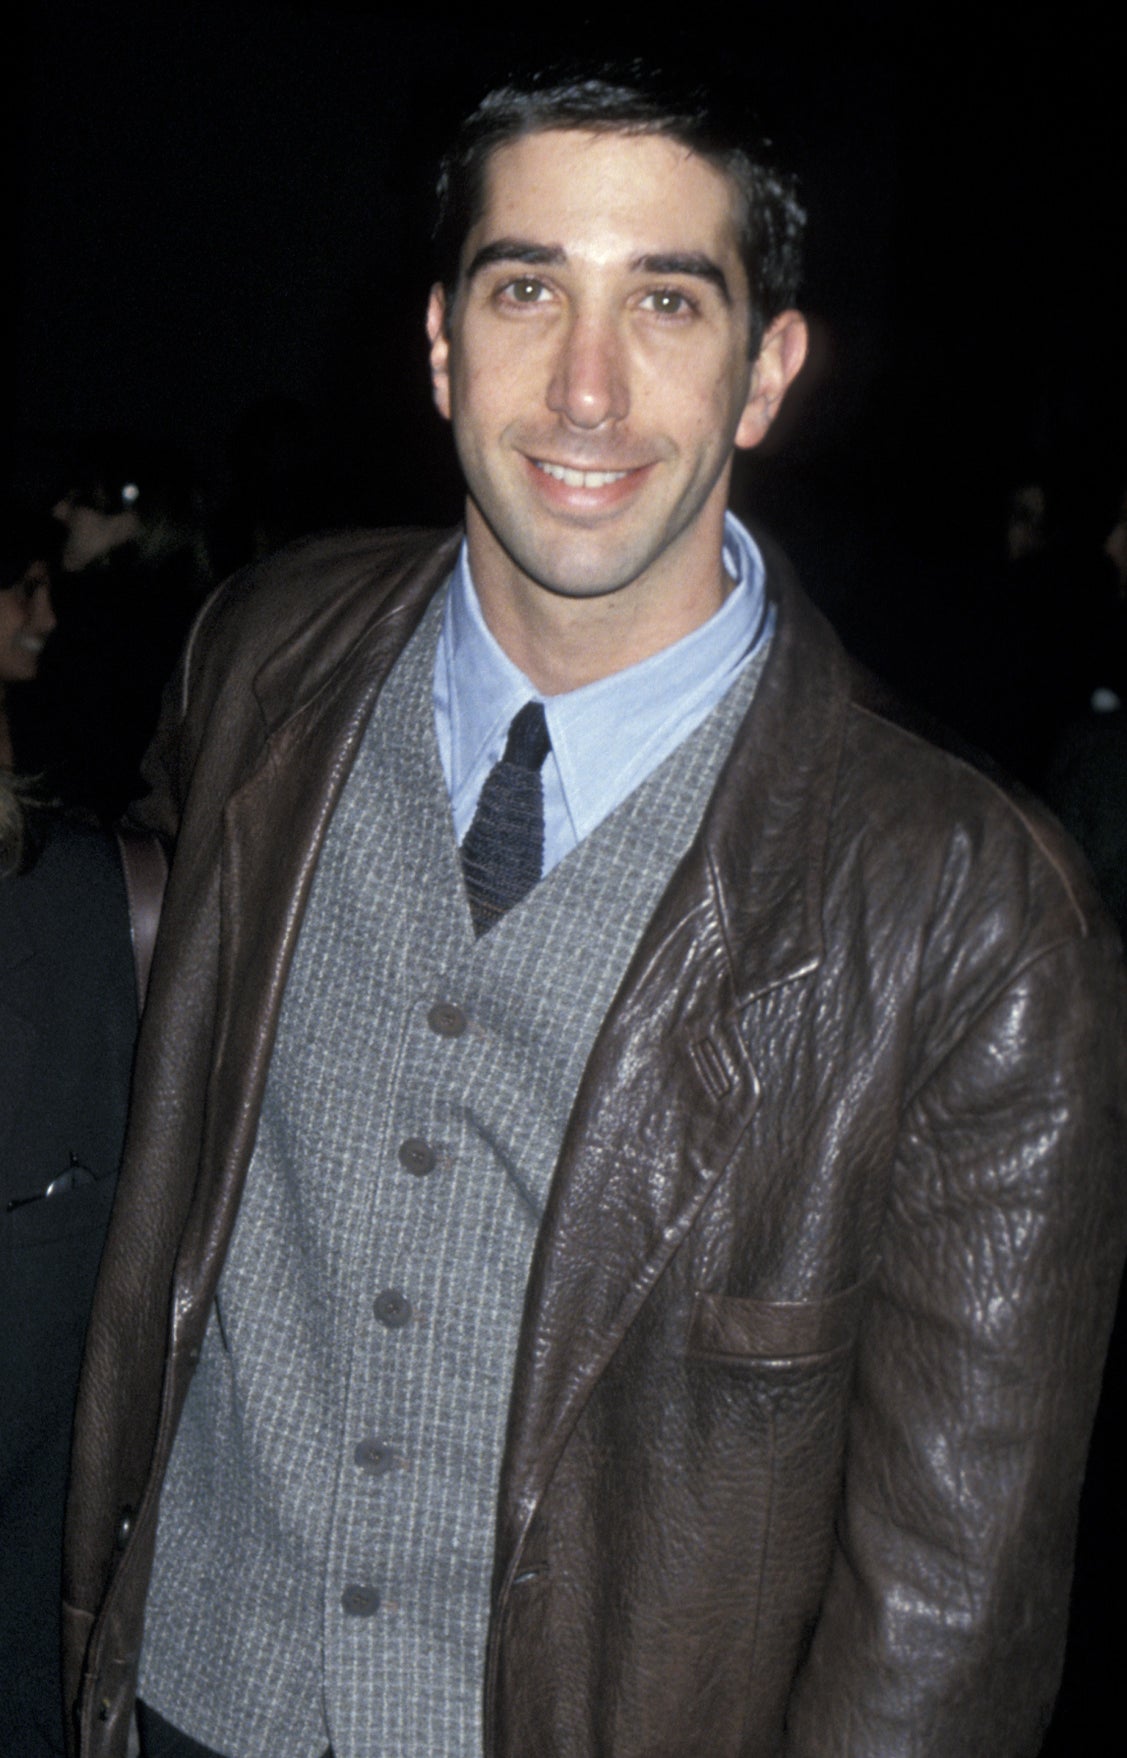 wearing a leather jacket over a button-down and vest